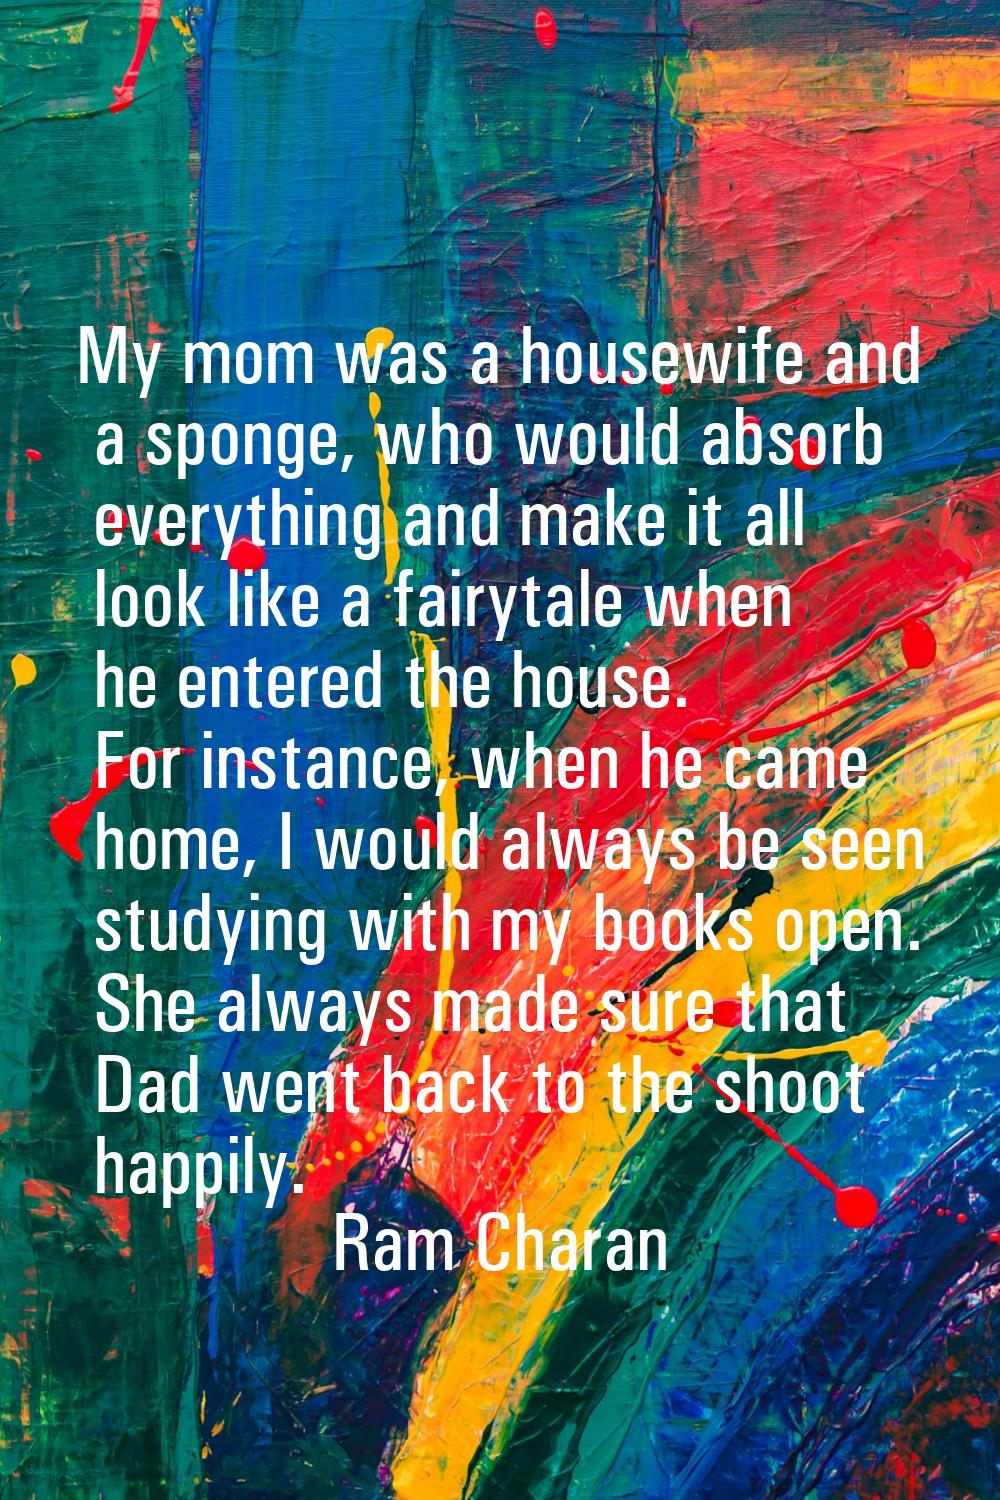 My mom was a housewife and a sponge, who would absorb everything and make it all look like a fairyt